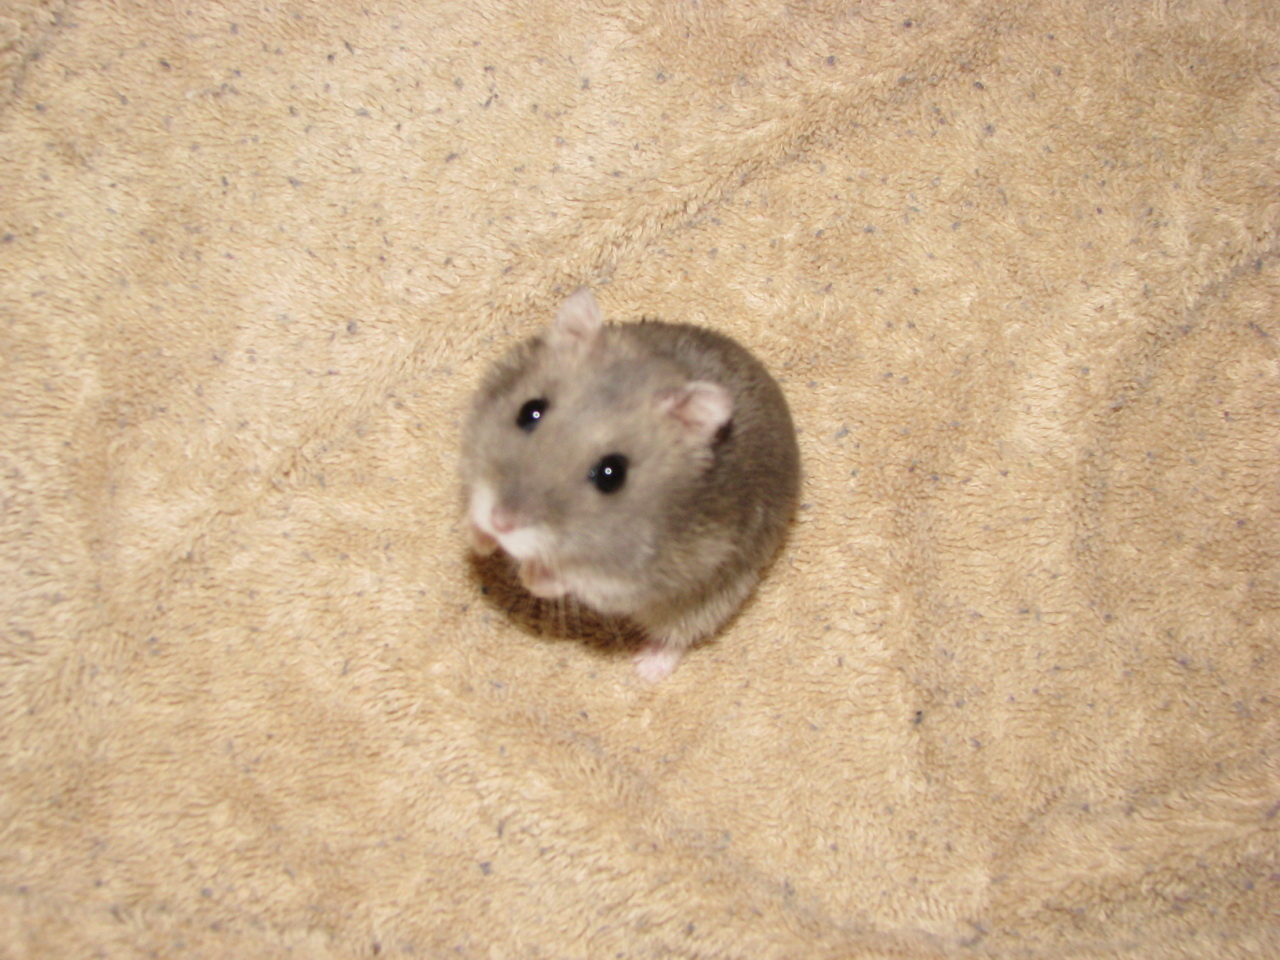 a grey mouse is shown peeking out from its hole